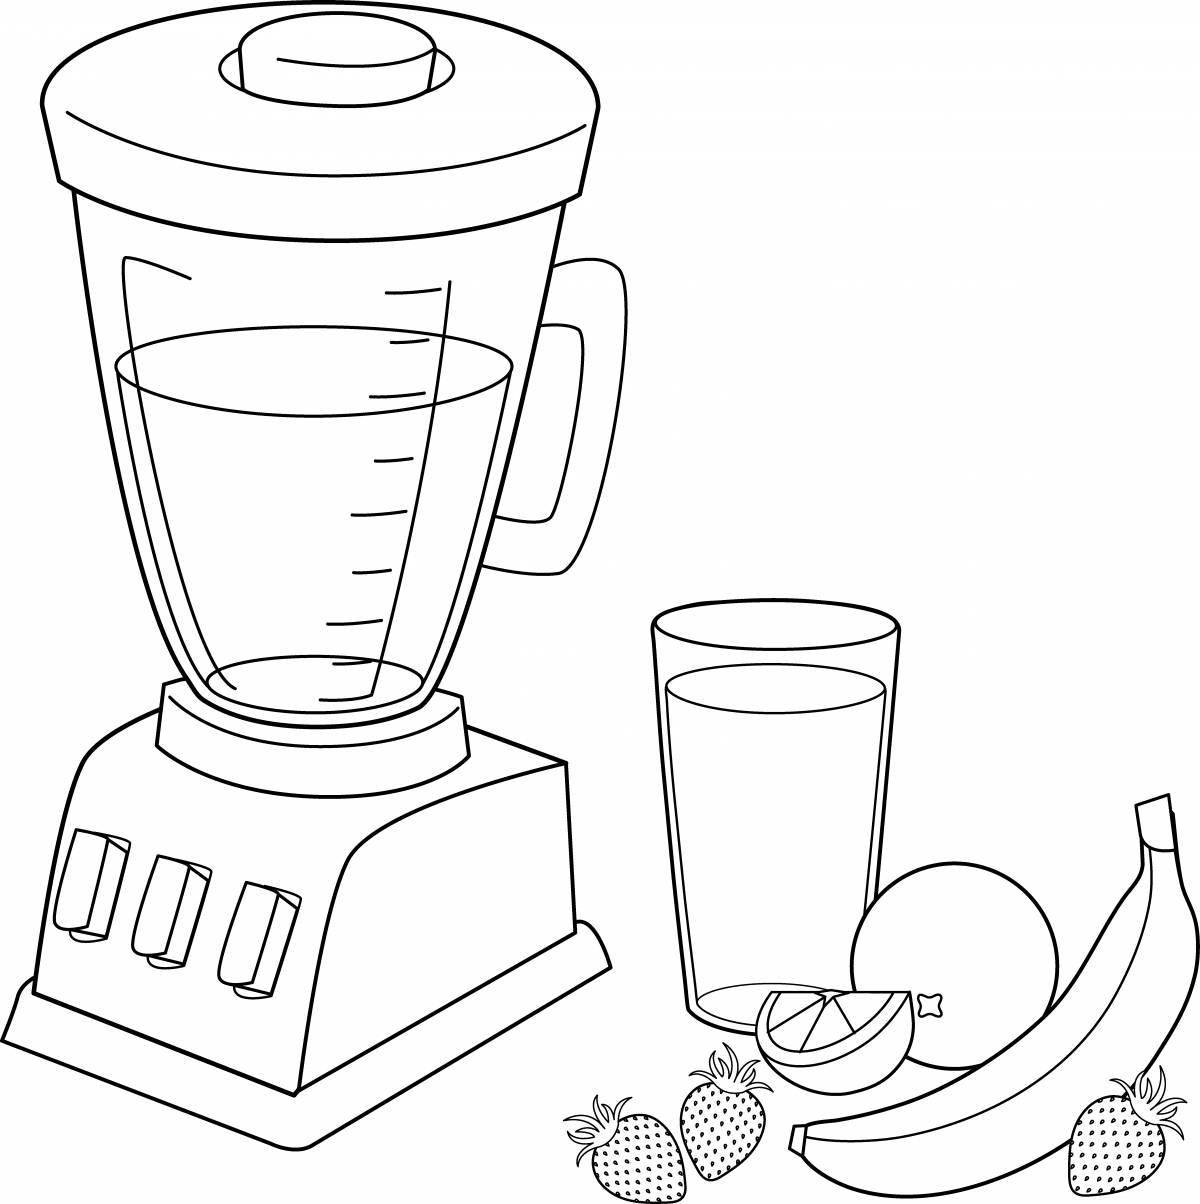 Coloring page mysterious devices